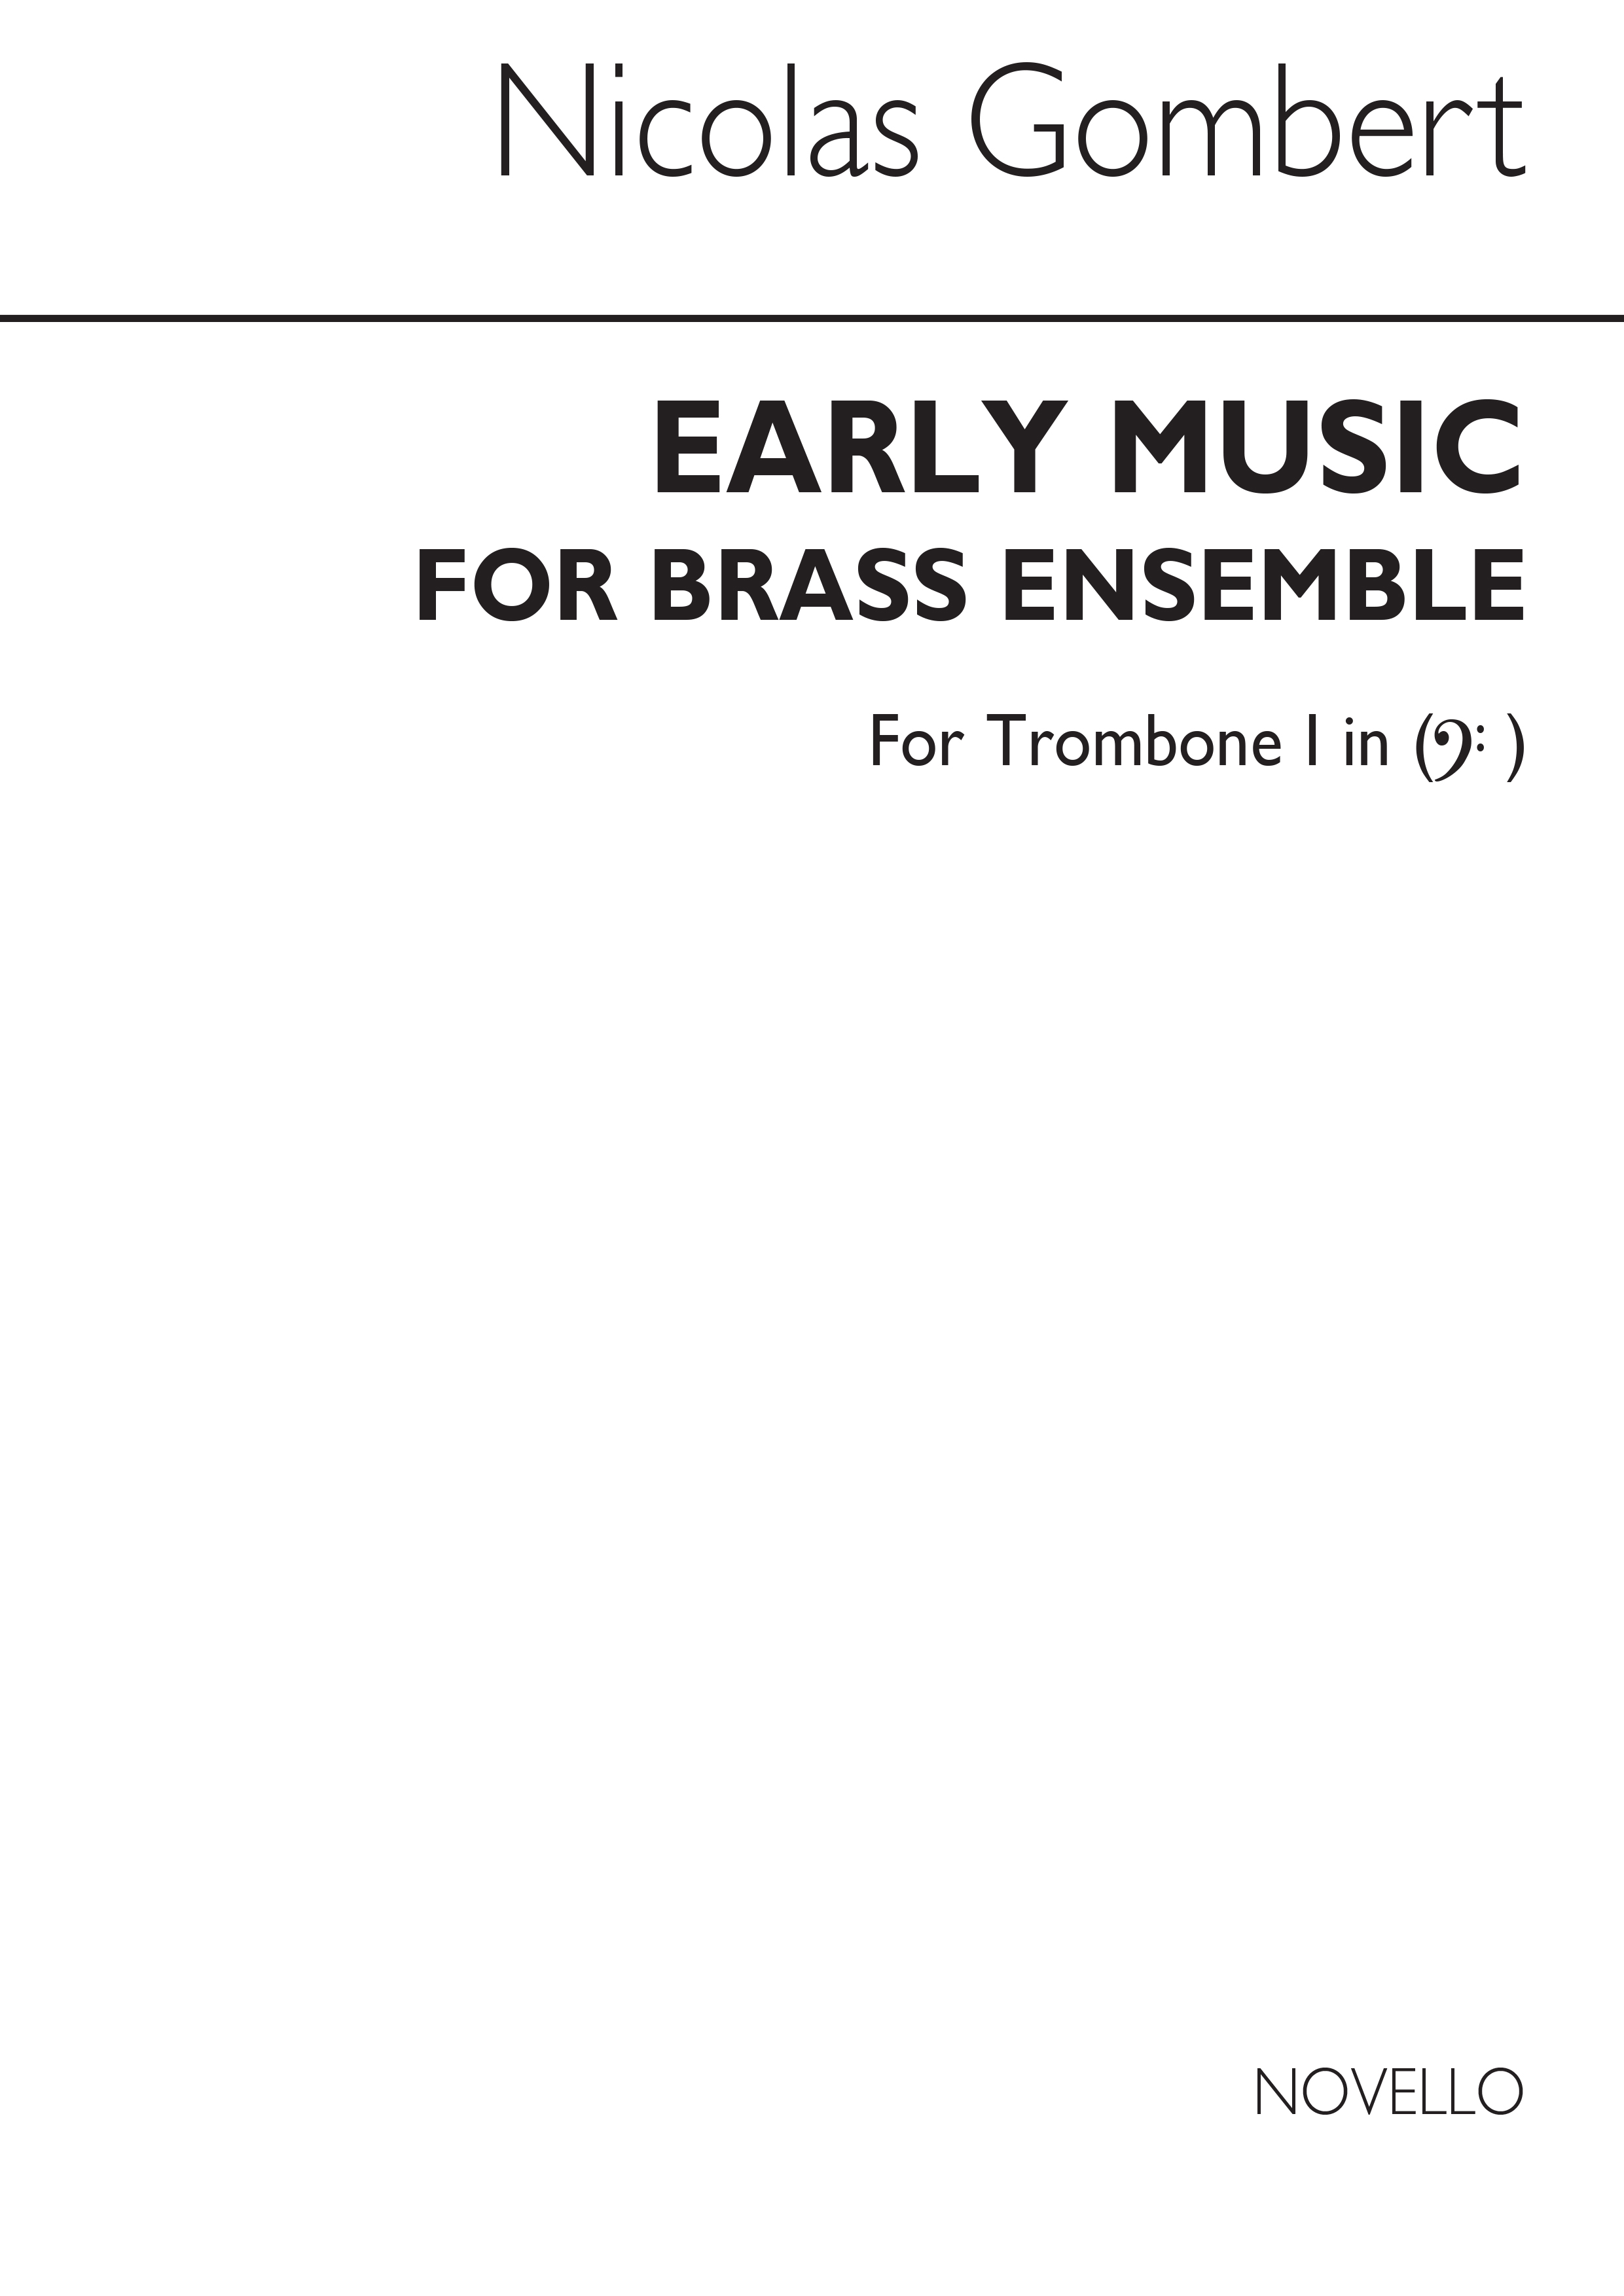 Lawson: Early Music For Brass Ensemble (Tbn 1 and Bass Clarinet Parts)